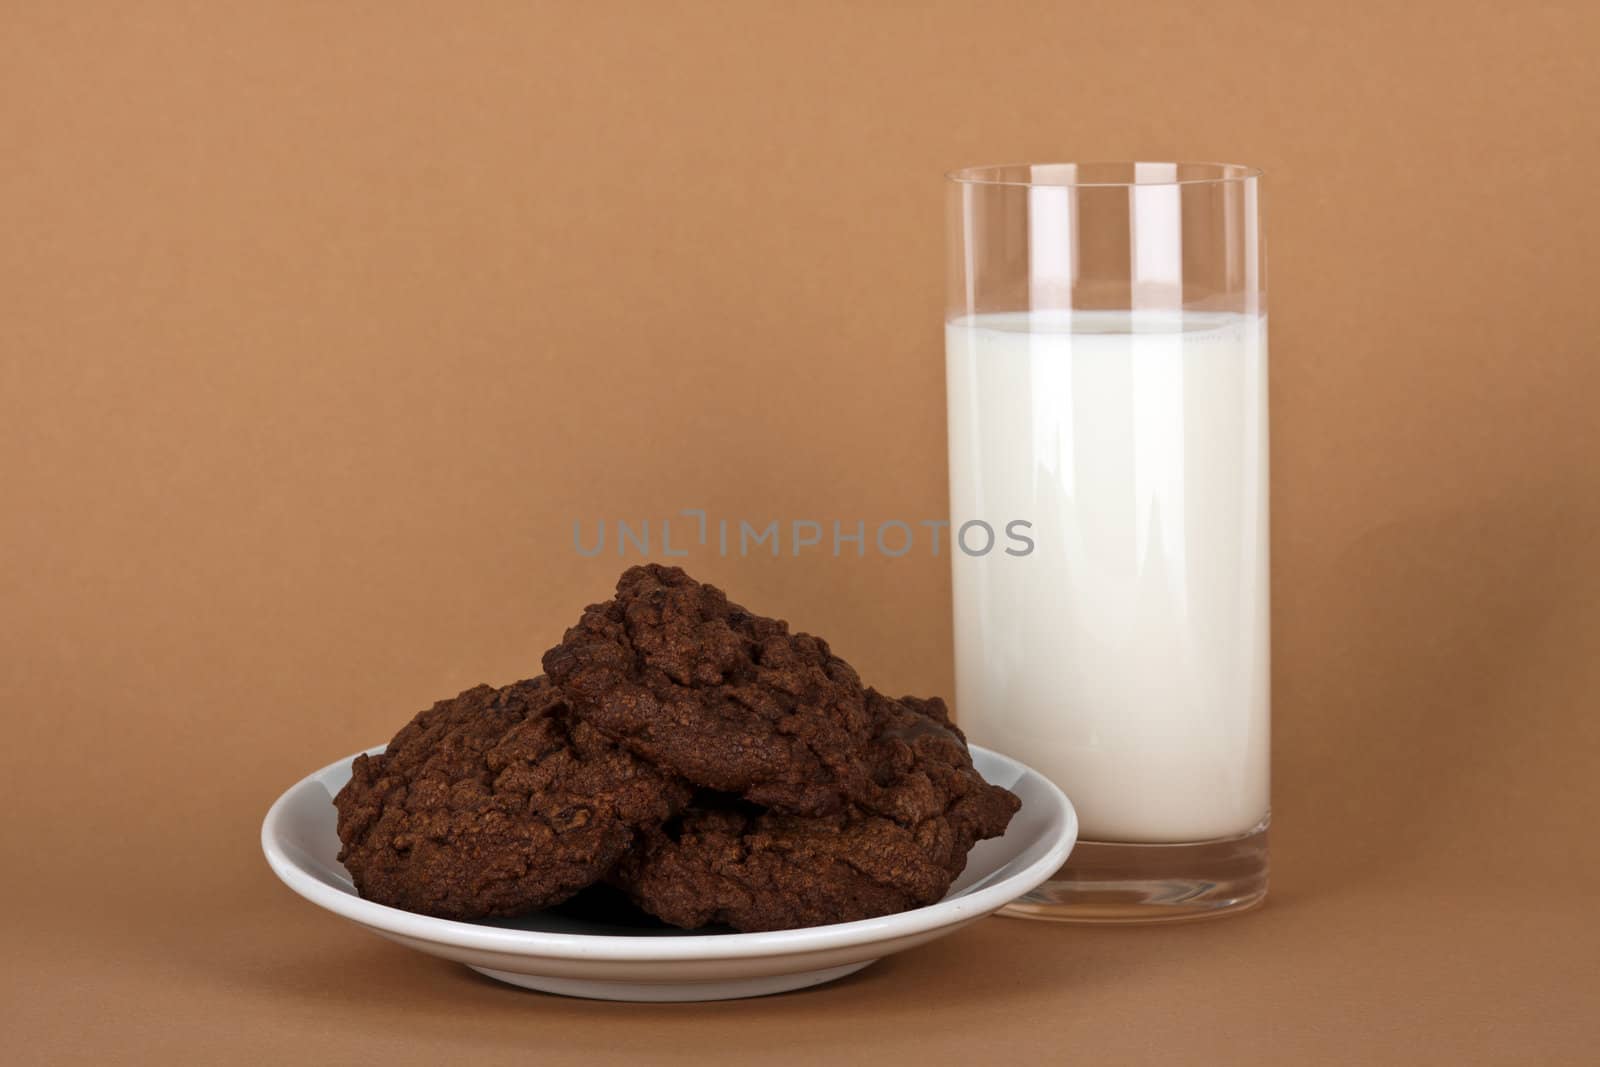 chocolate cookies with a glass of milk